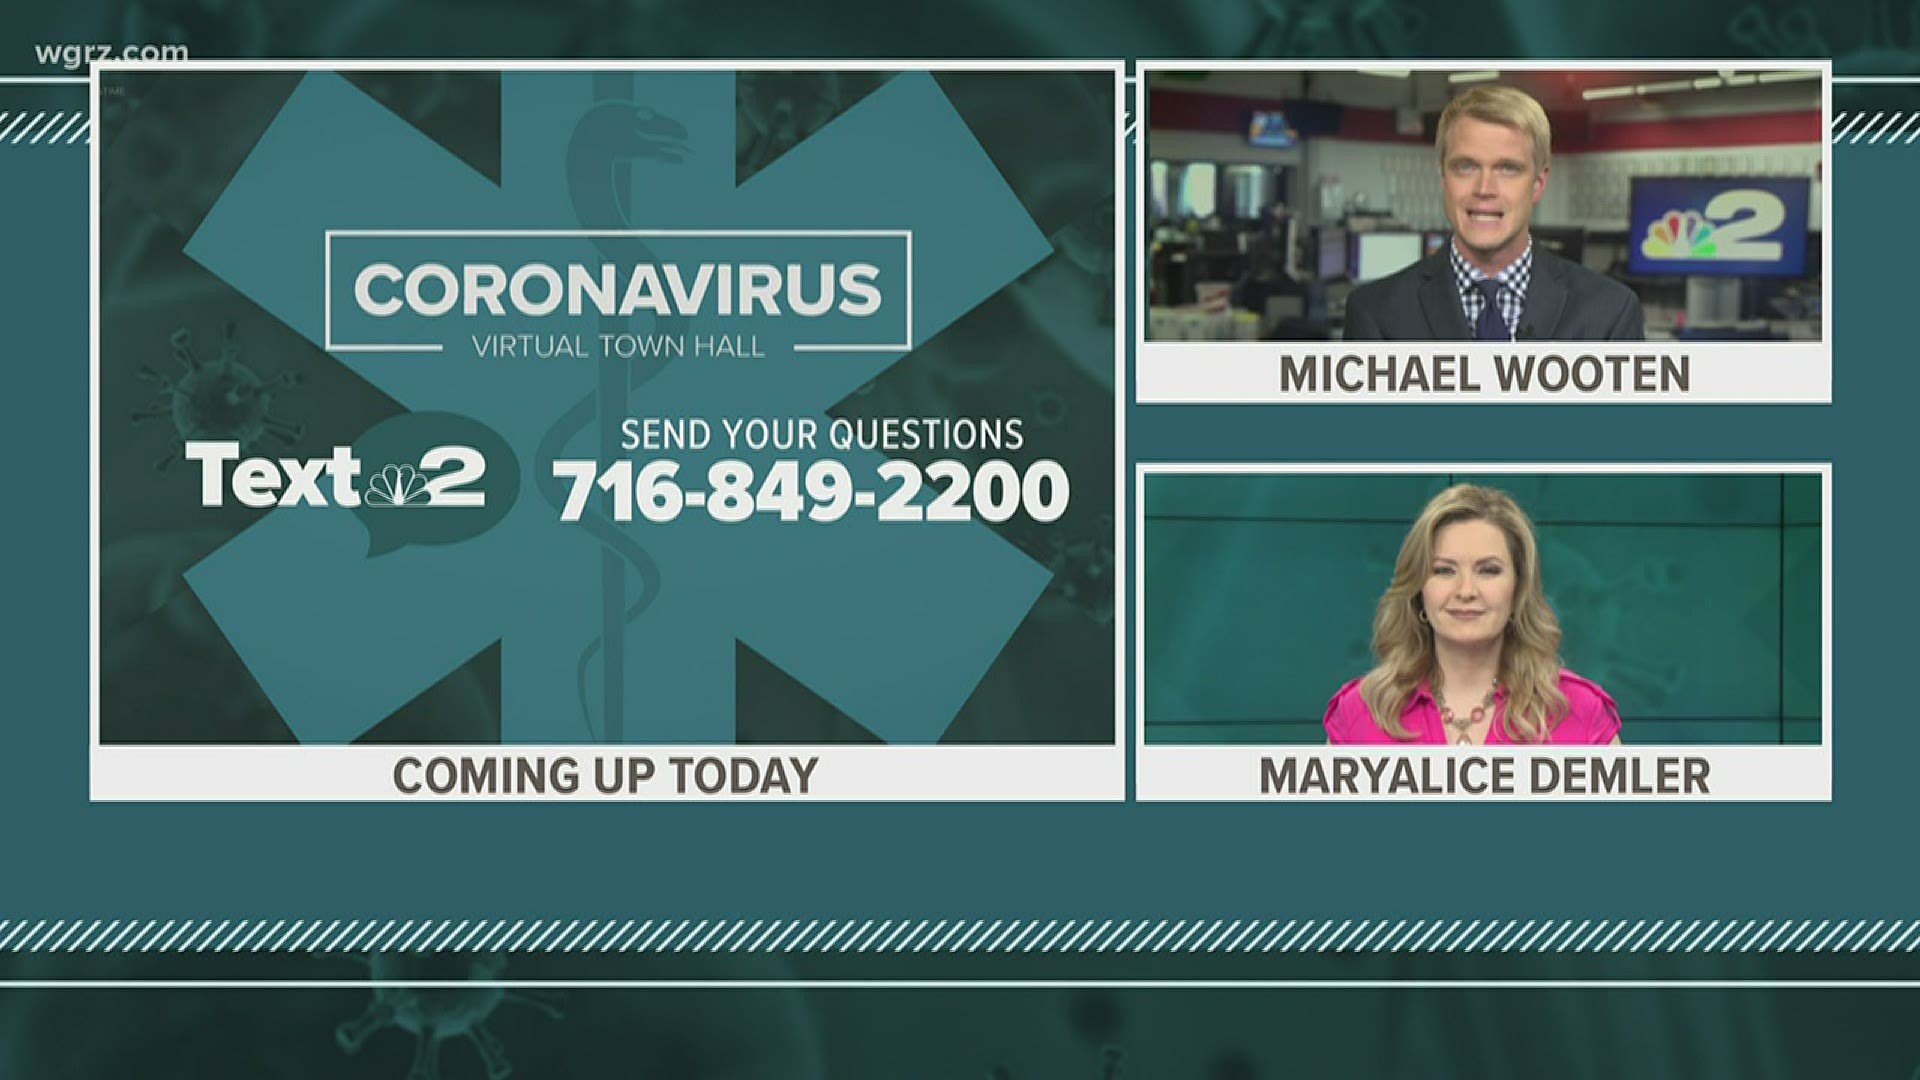 we get your Coronavirus questions answered.